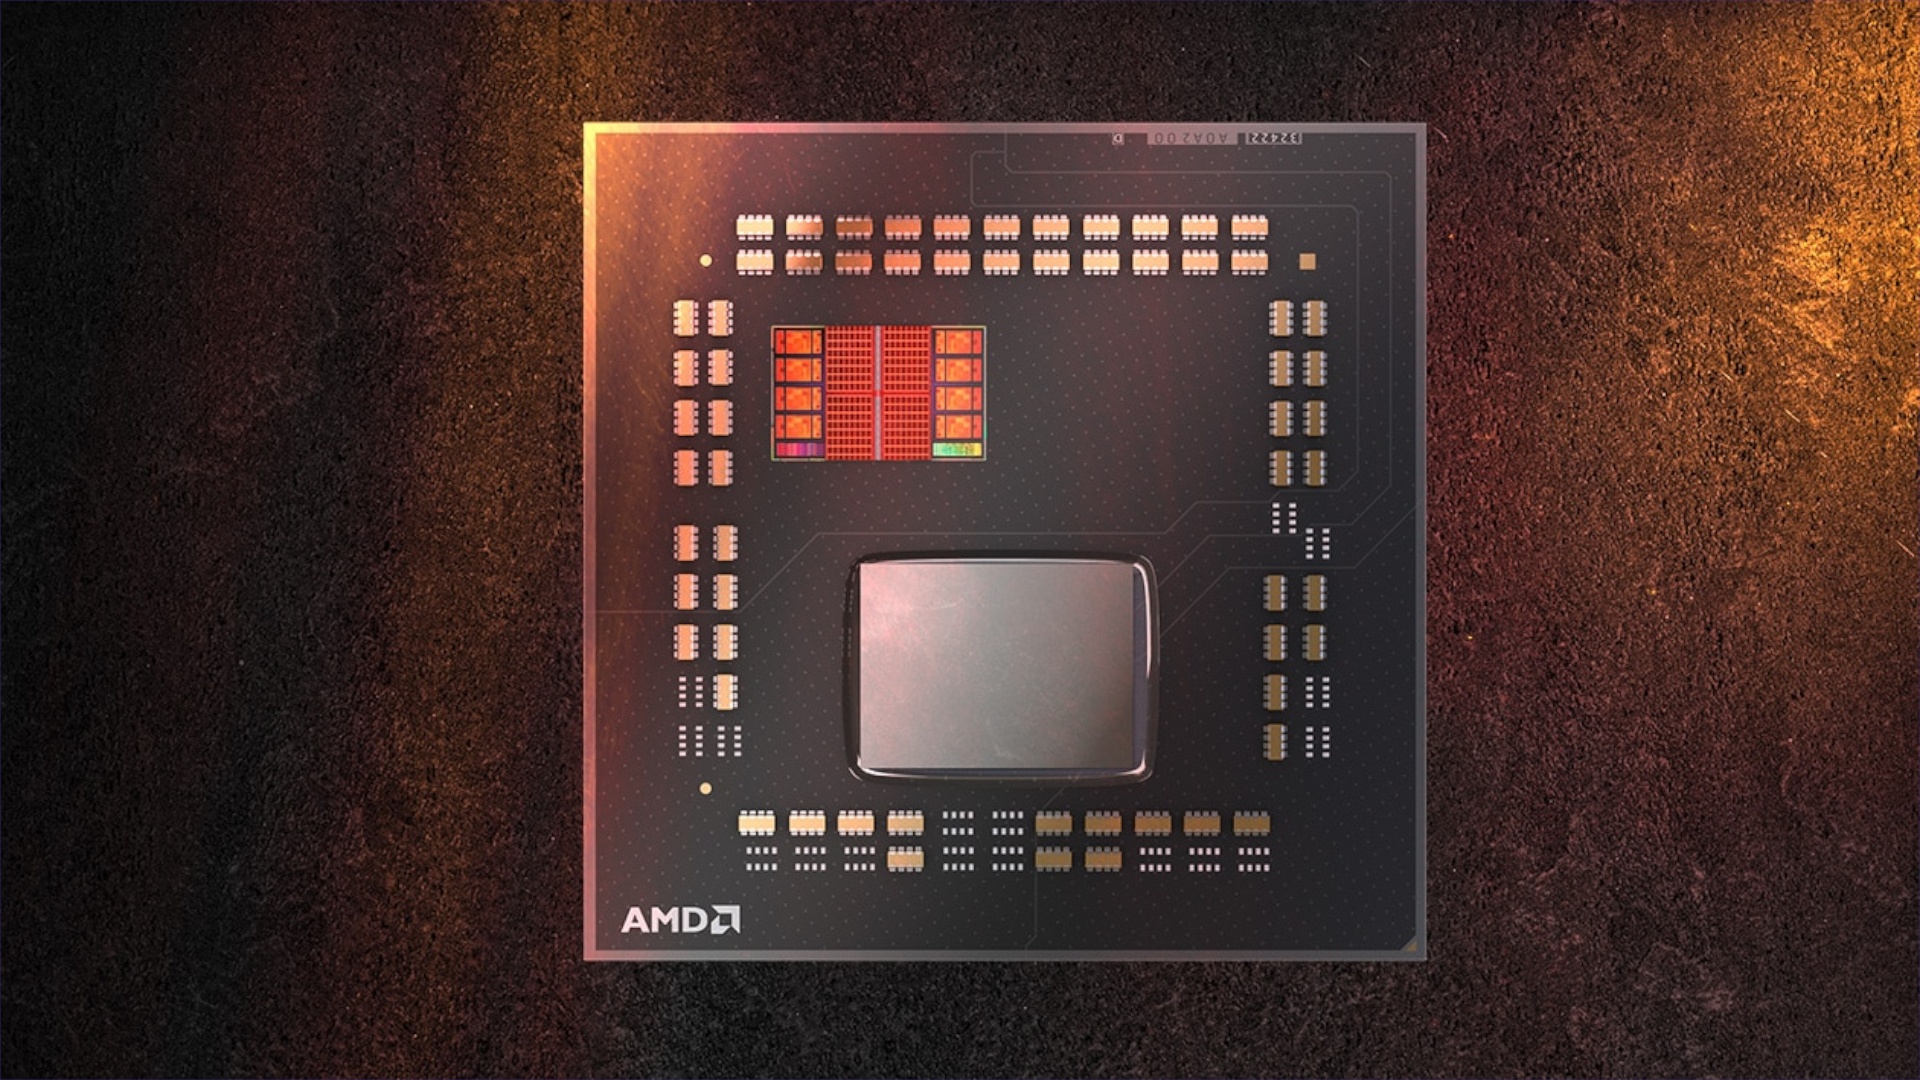 AMD’s best gaming CPU is getting successors and could put more pressure on Intel in a few months